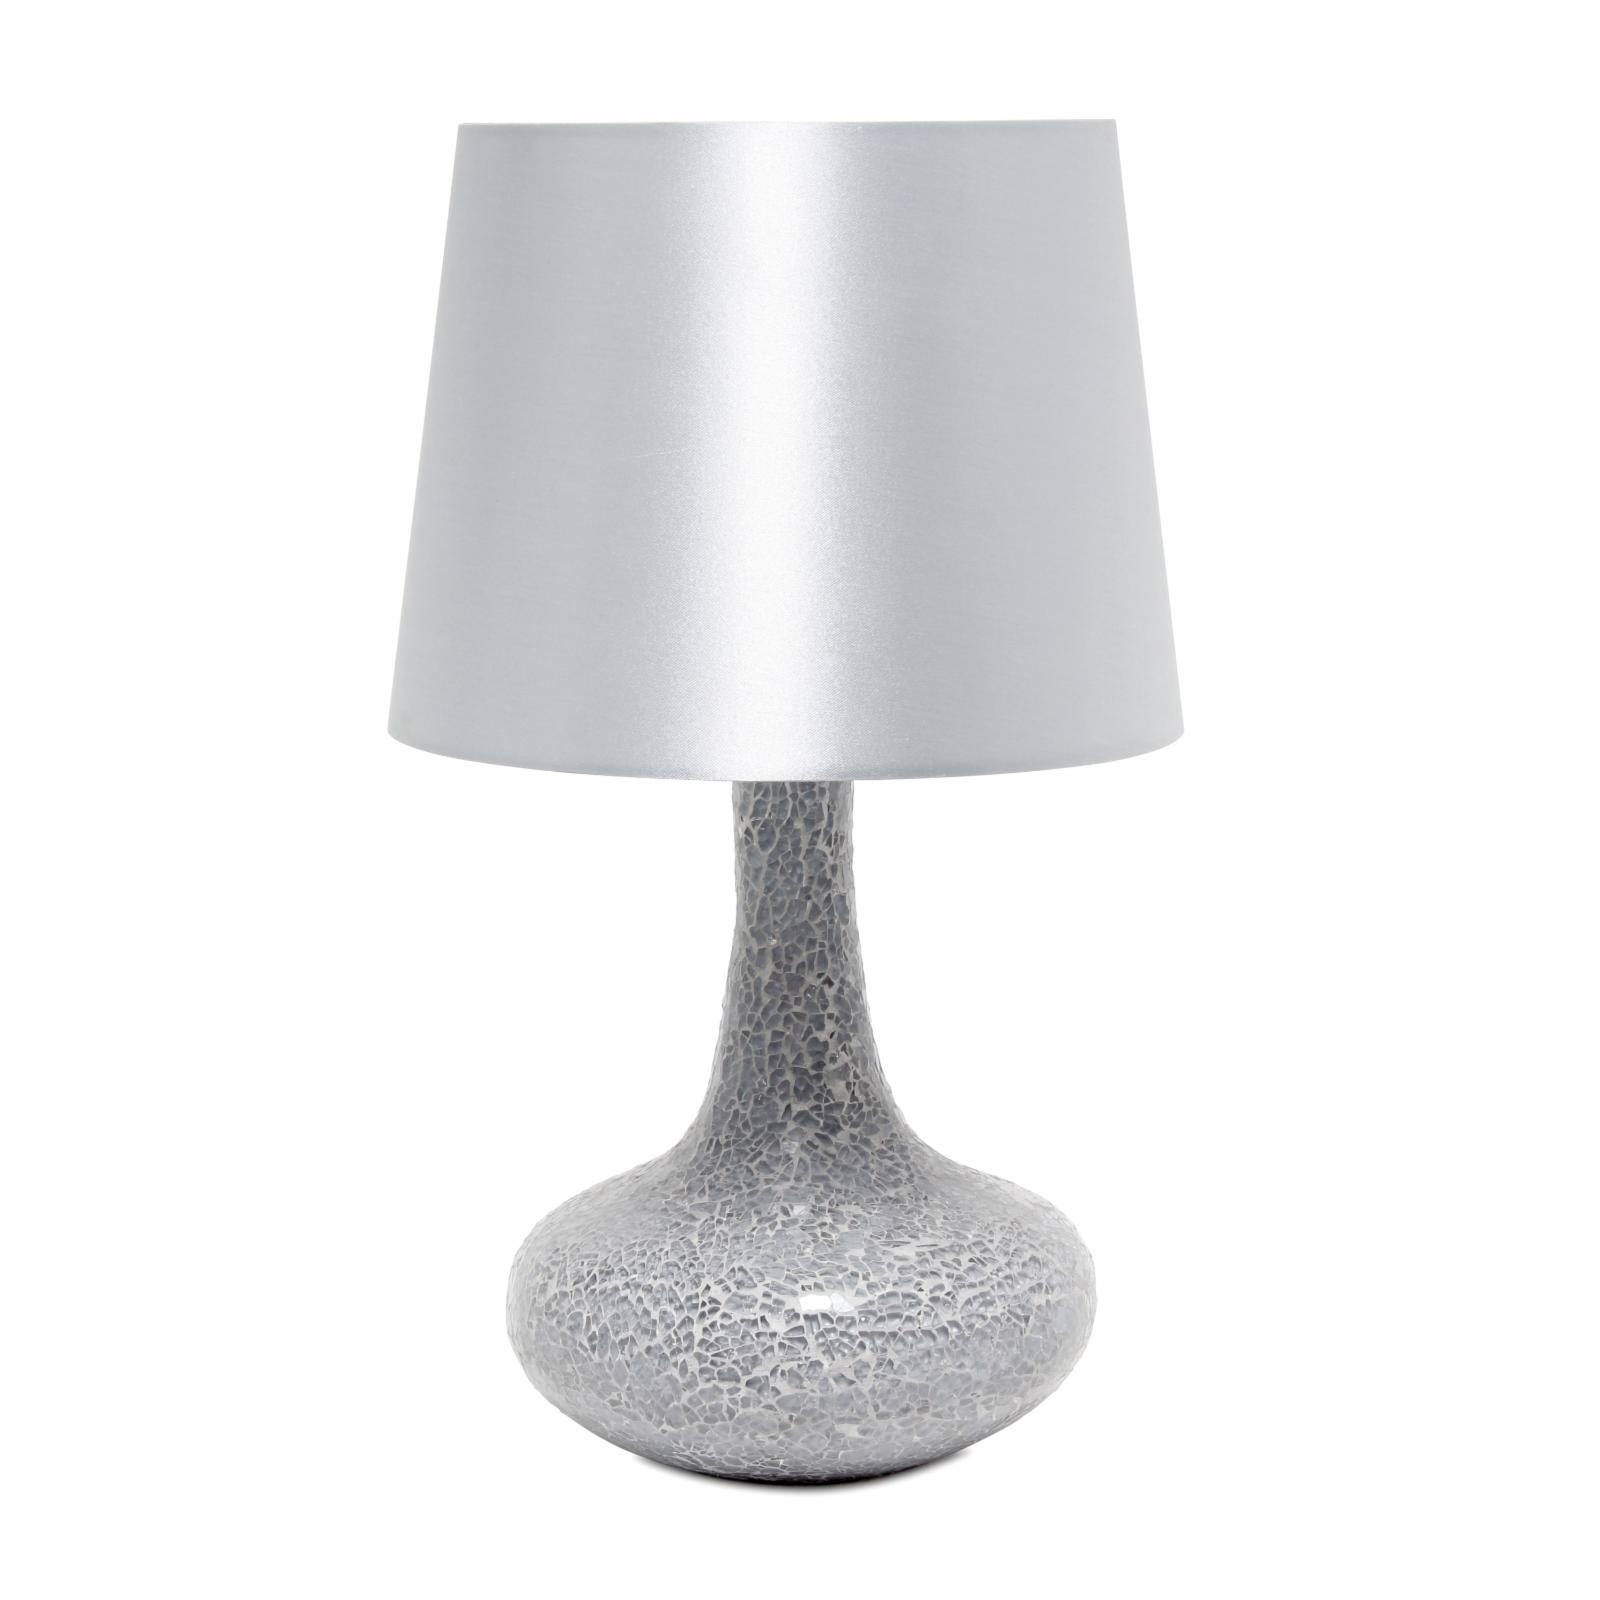 Lighting Business Mosaic Tiled Glass Genie Table Lamp with Fabric Shade